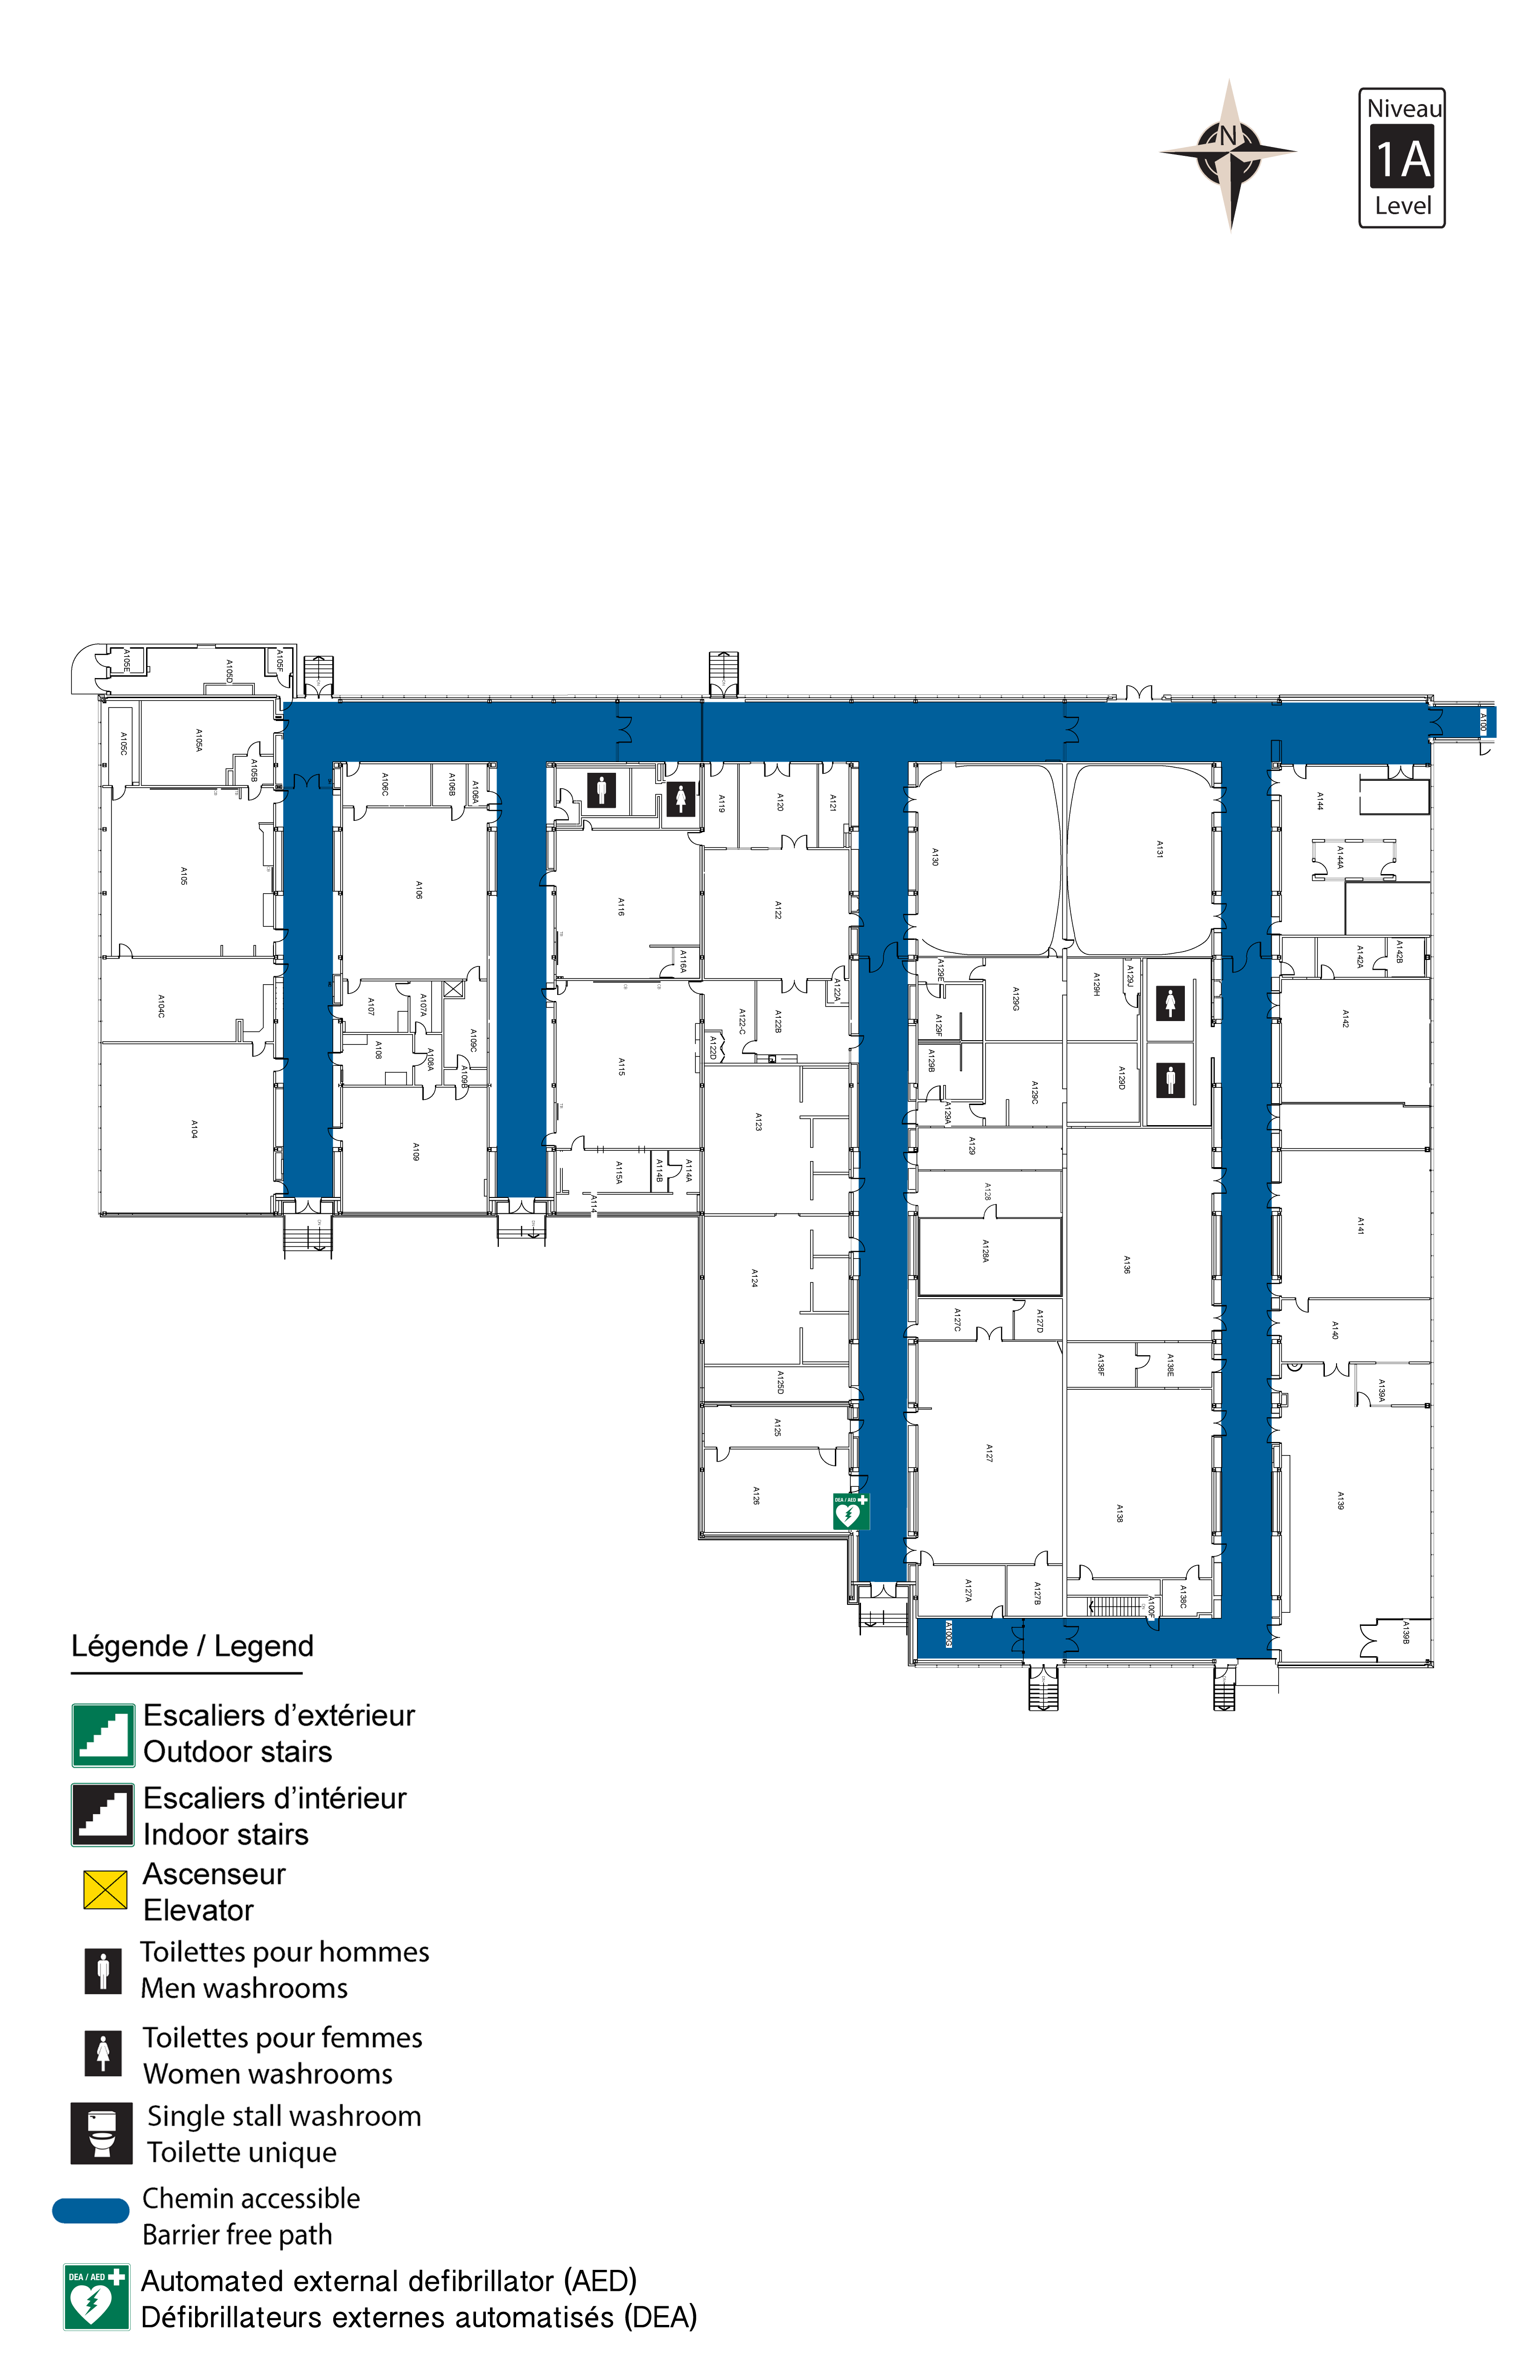 Accessible map - Lees level 1 